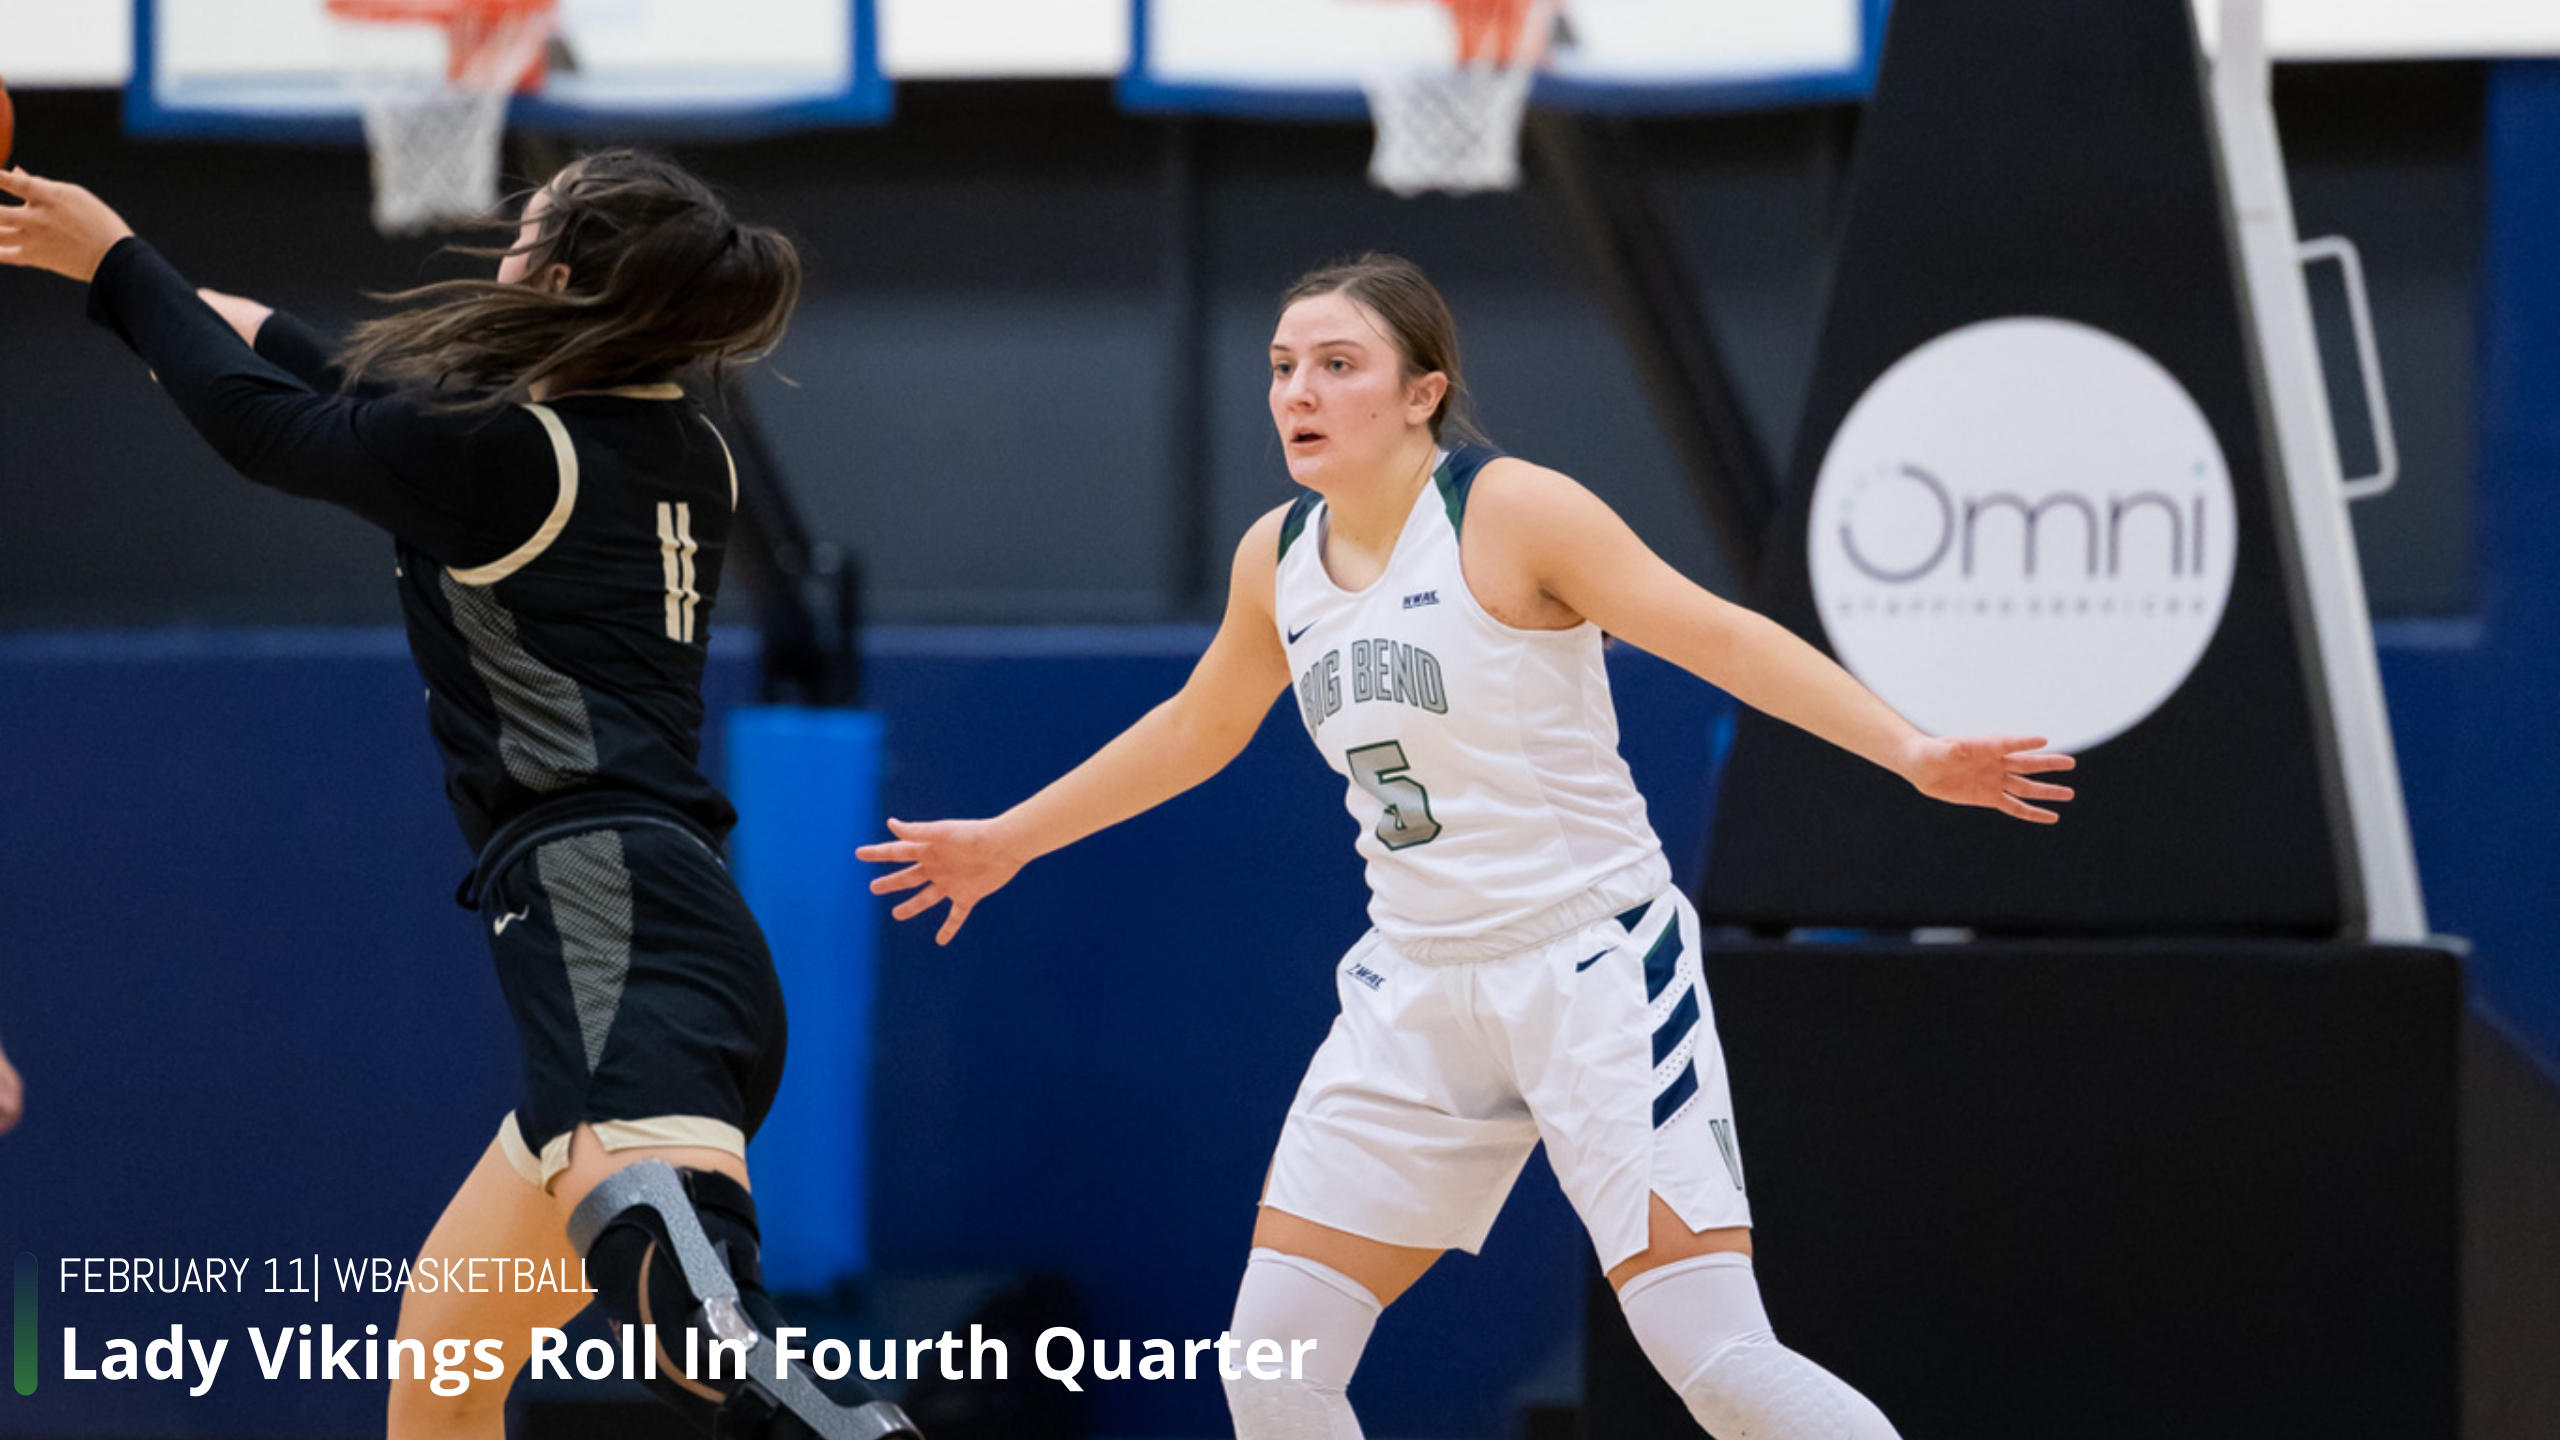 Lady Vikings Roll In Fourth Quarter